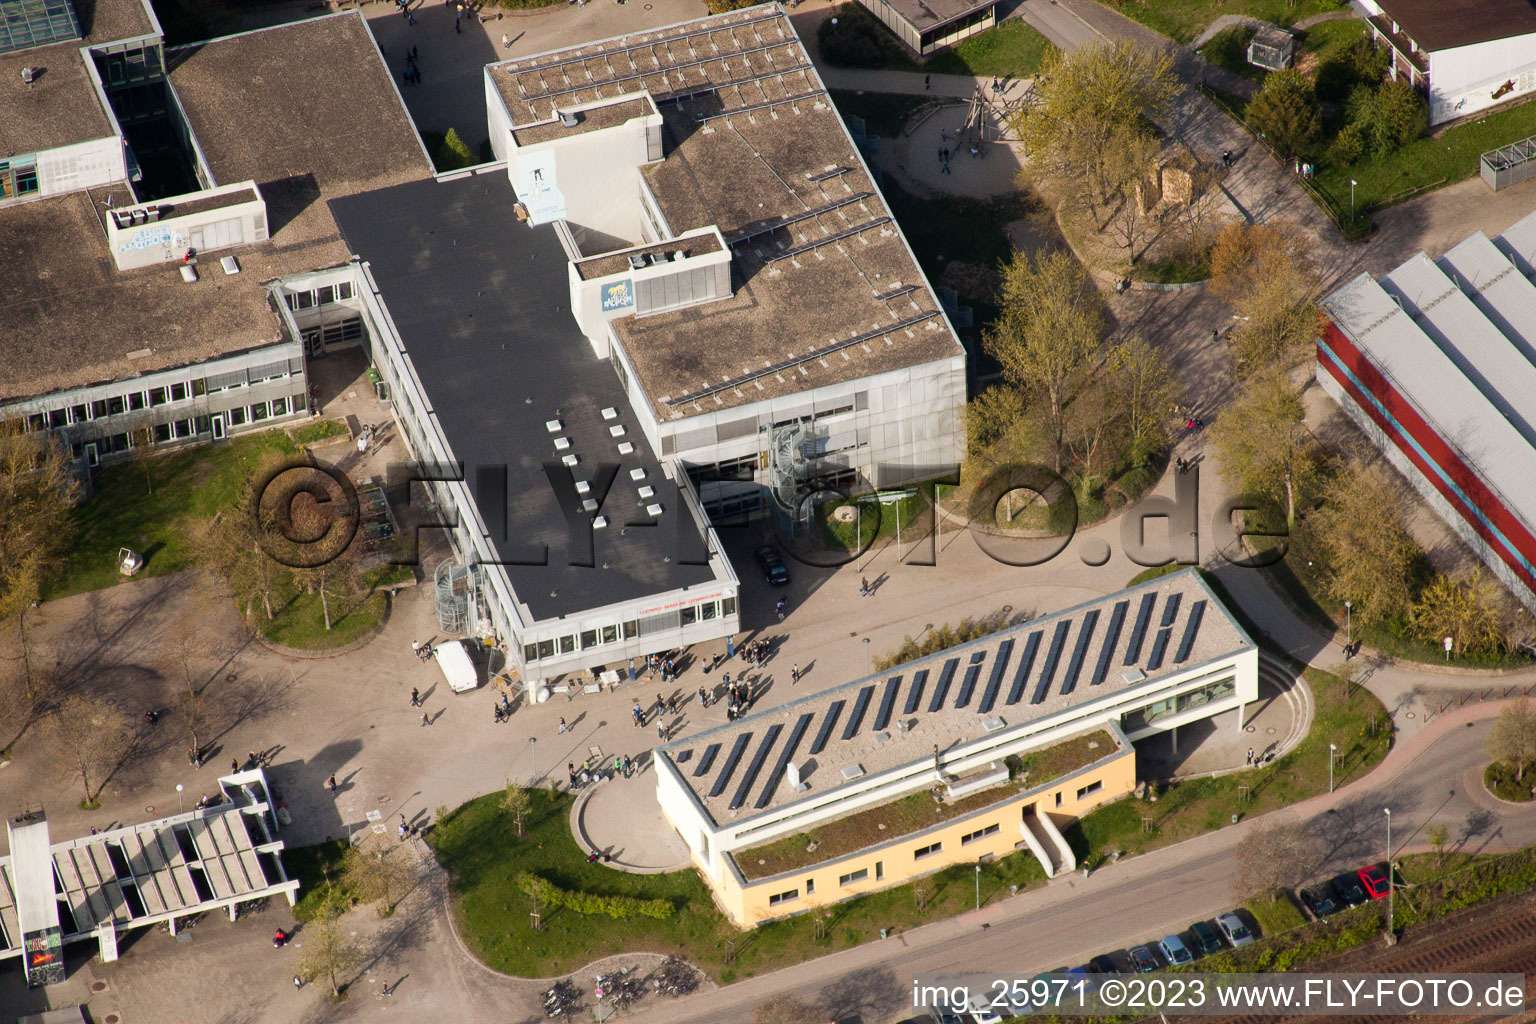 School building of the Ludwig-Marum-Gymnasium Pfinztal in the district Berghausen in Pfinztal in the state Baden-Wurttemberg seen from above